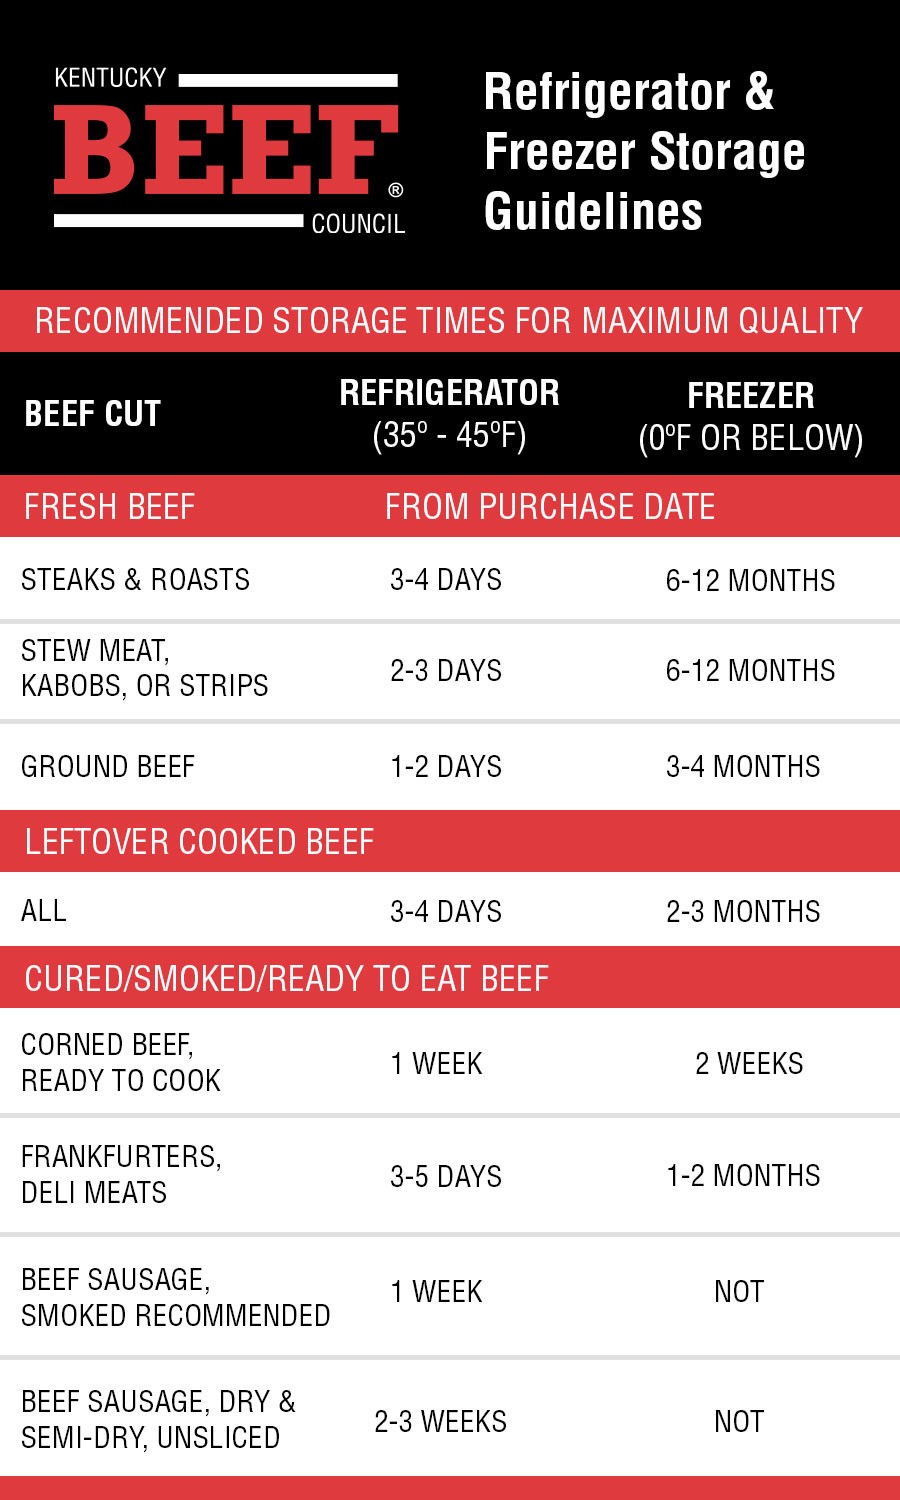 Tips For Freezing: A Guide to Proper Meat Storage